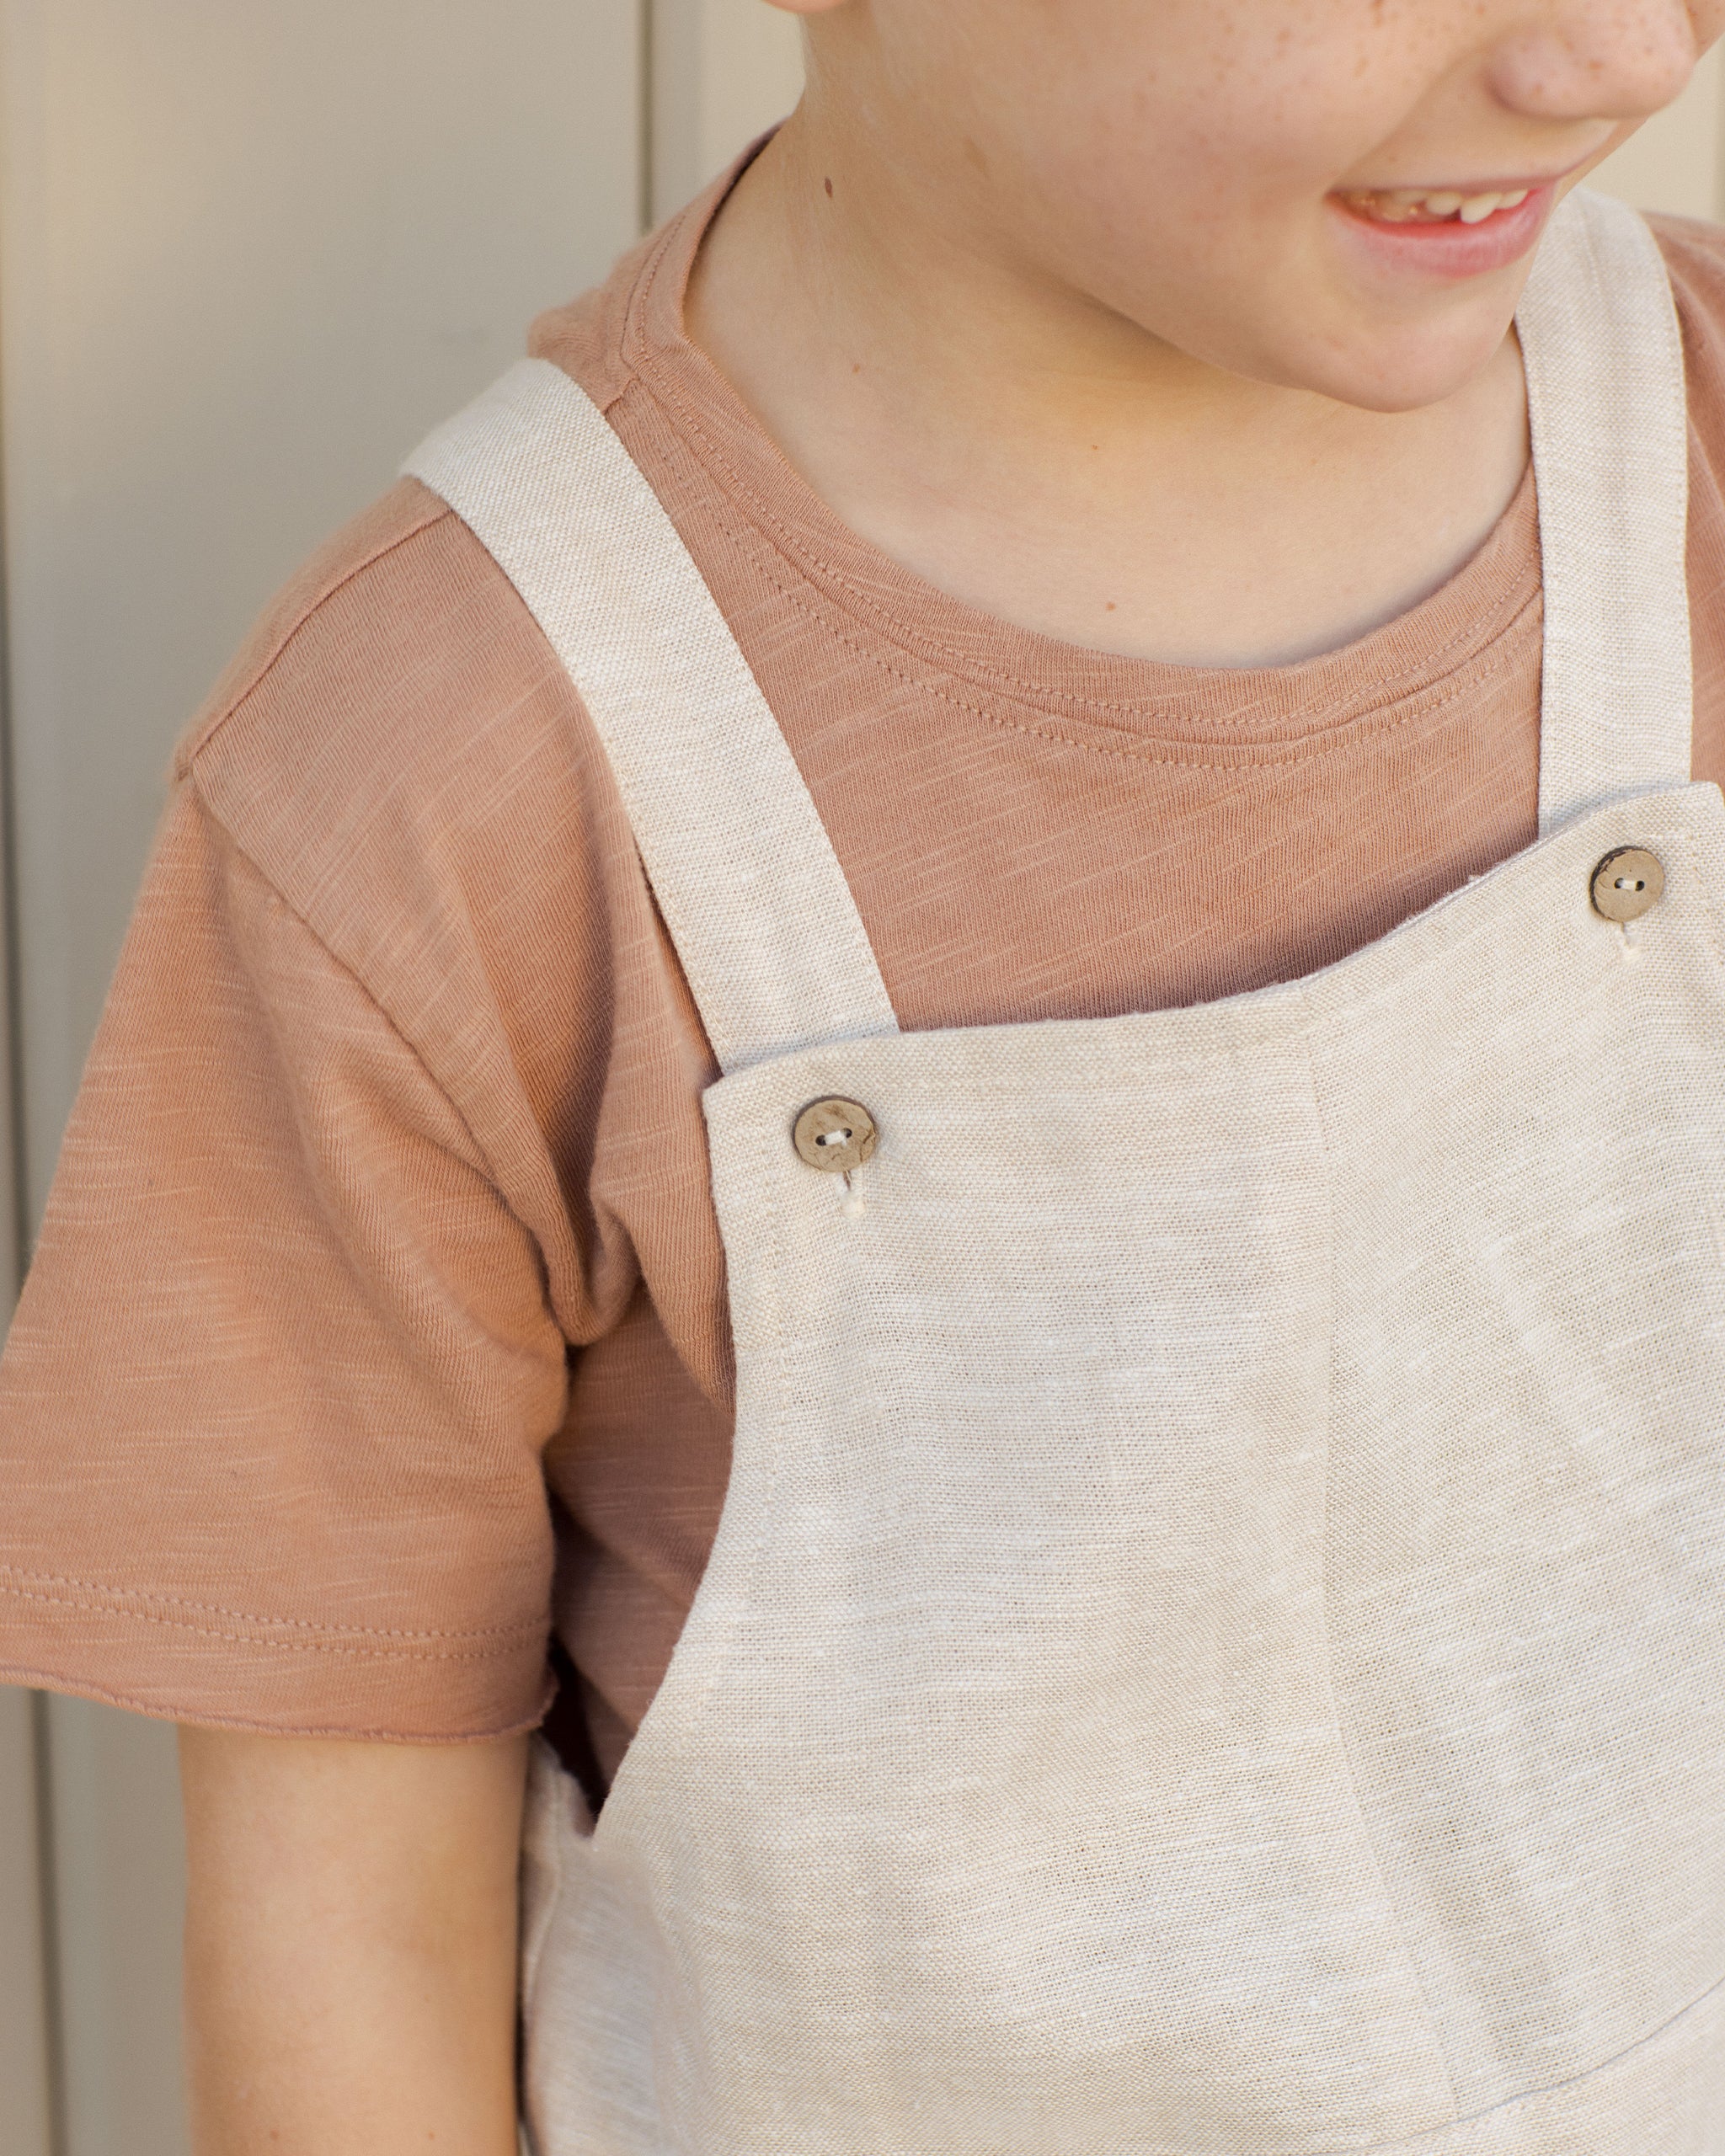 Billie Overalls || Heathered Sand - Rylee + Cru | Kids Clothes | Trendy Baby Clothes | Modern Infant Outfits |